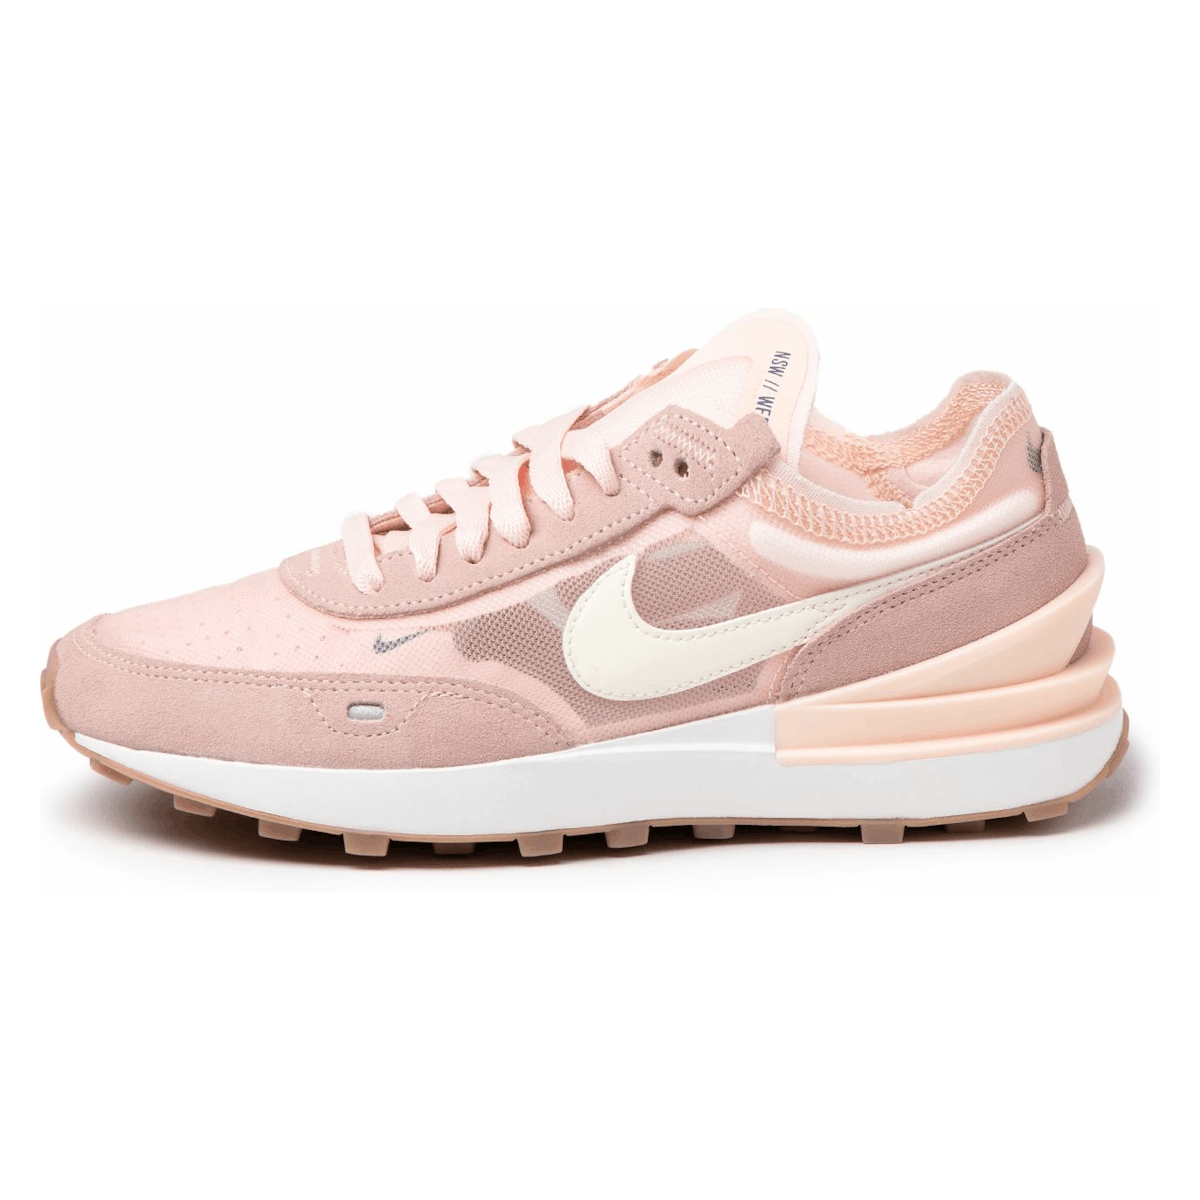 Nike WMNS Waffle One Pale Coral